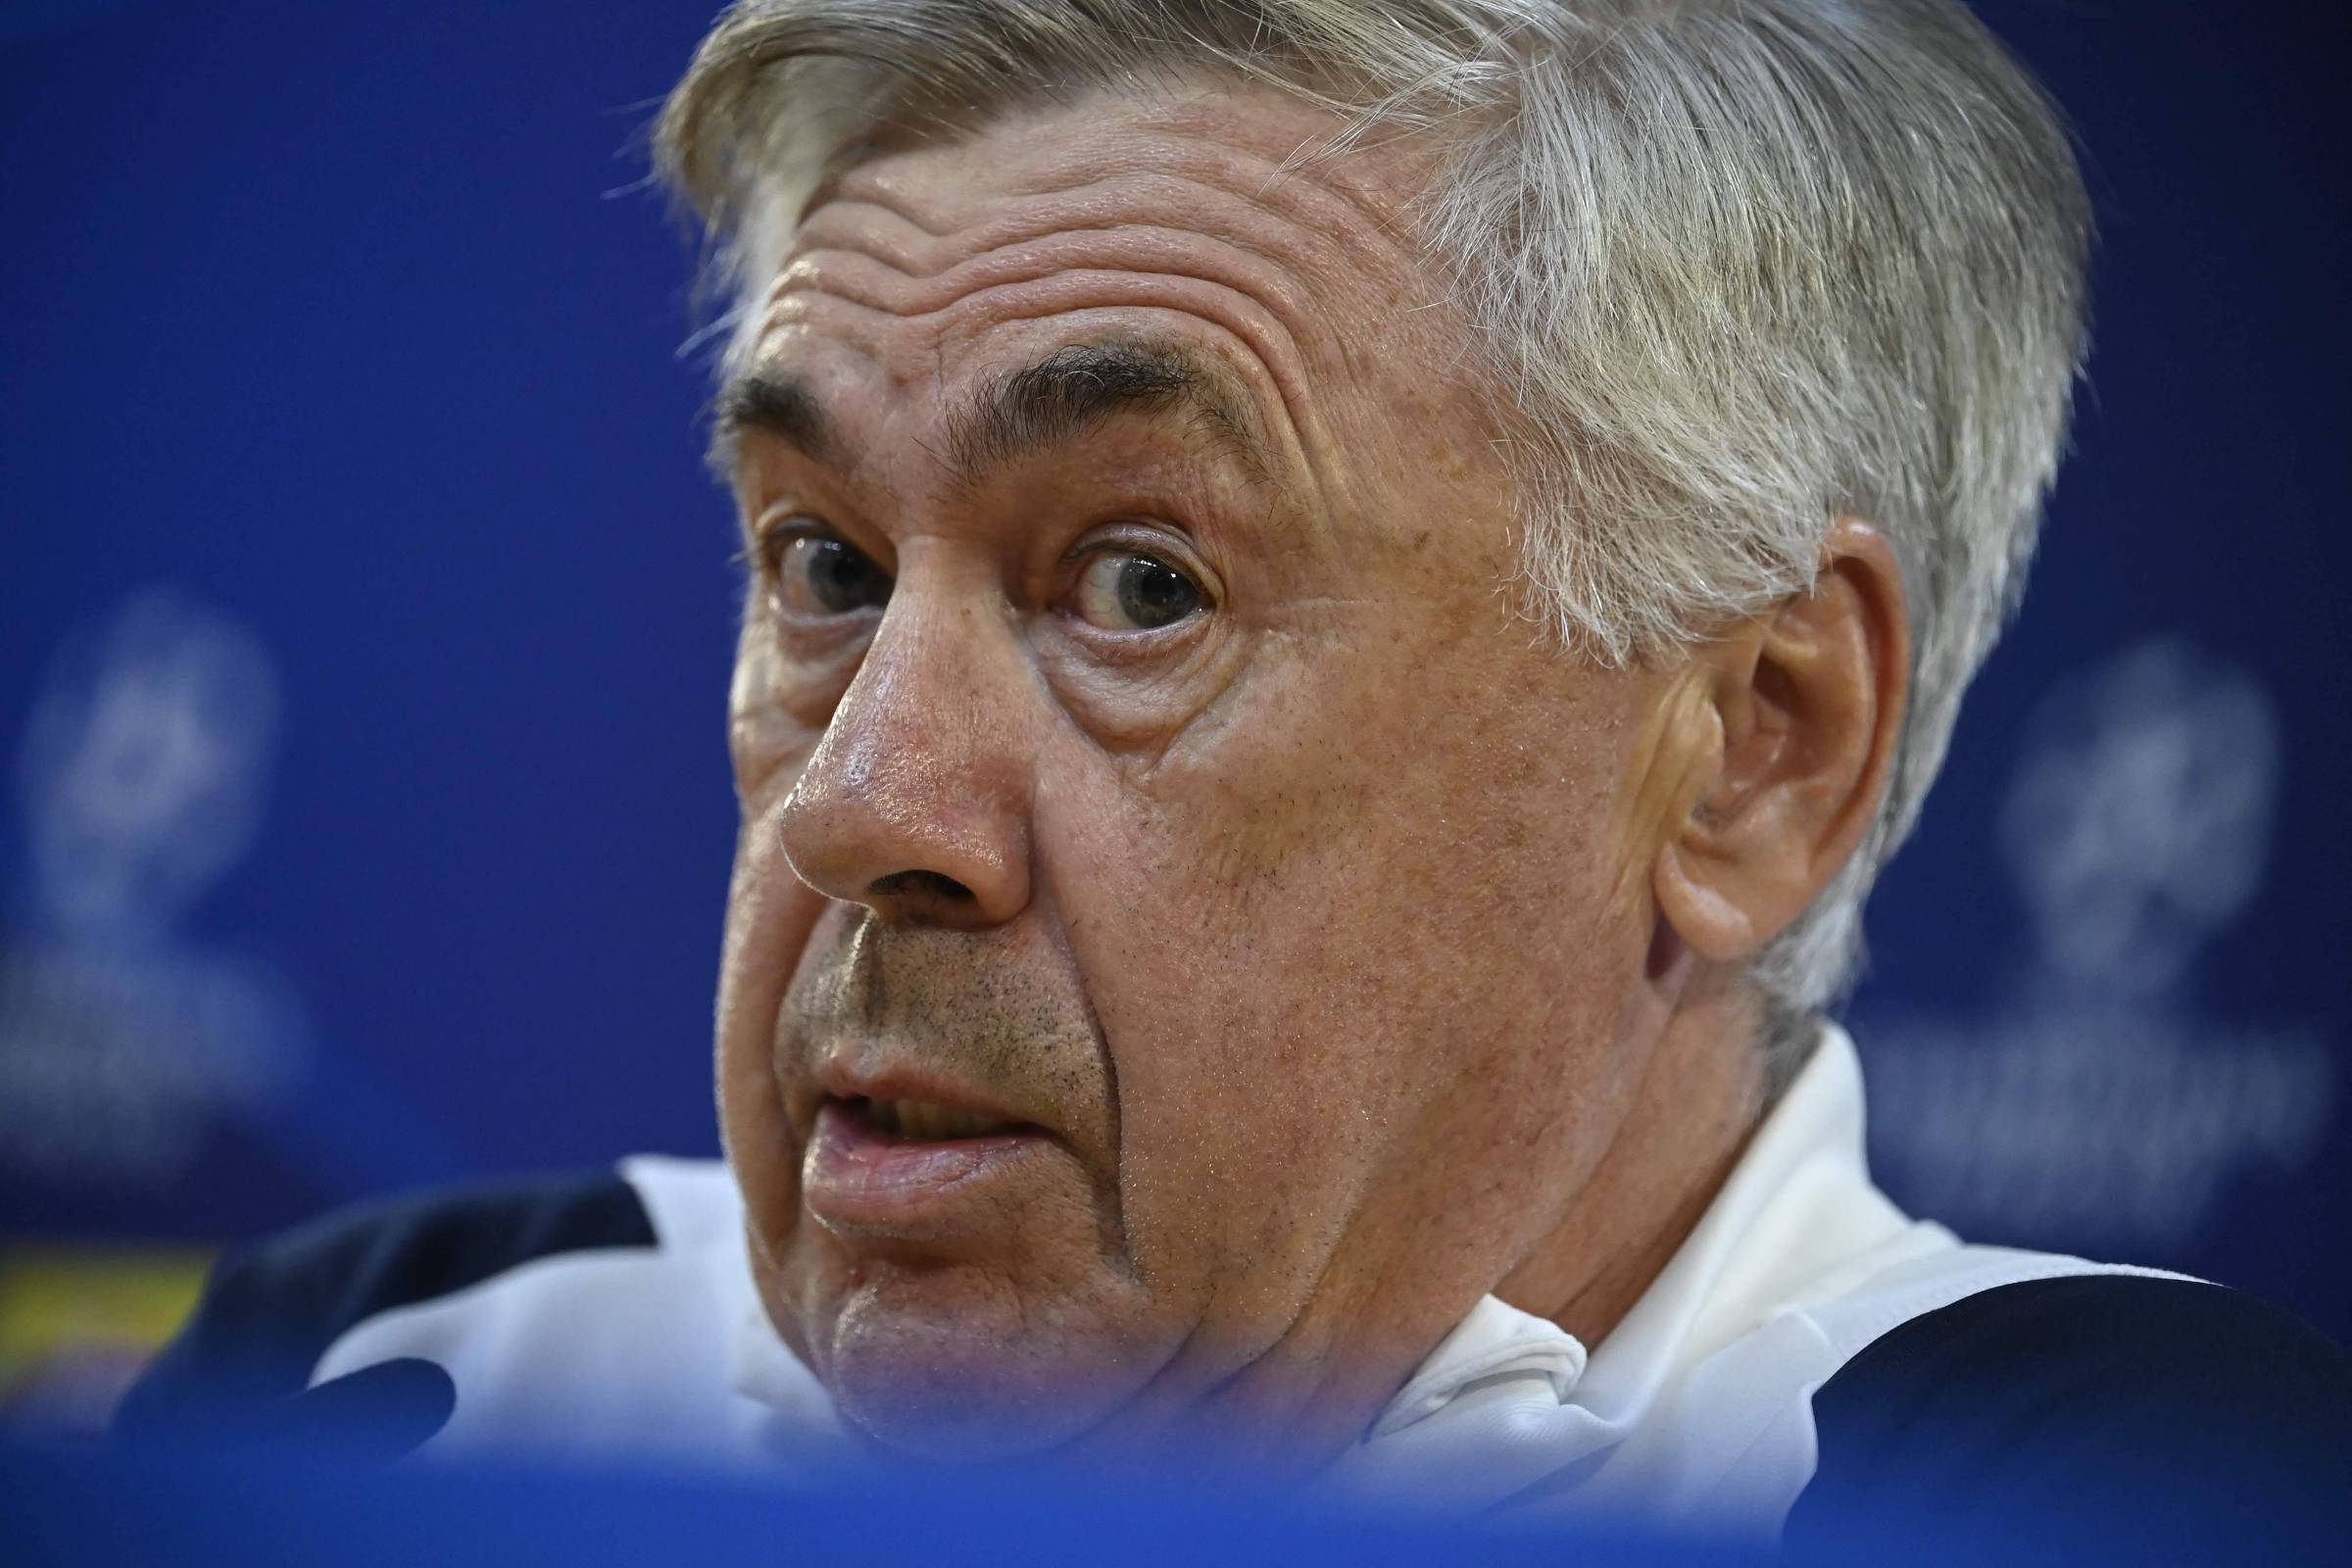 Real Madrid announces Ancelotti’s contract renewal until June 2026